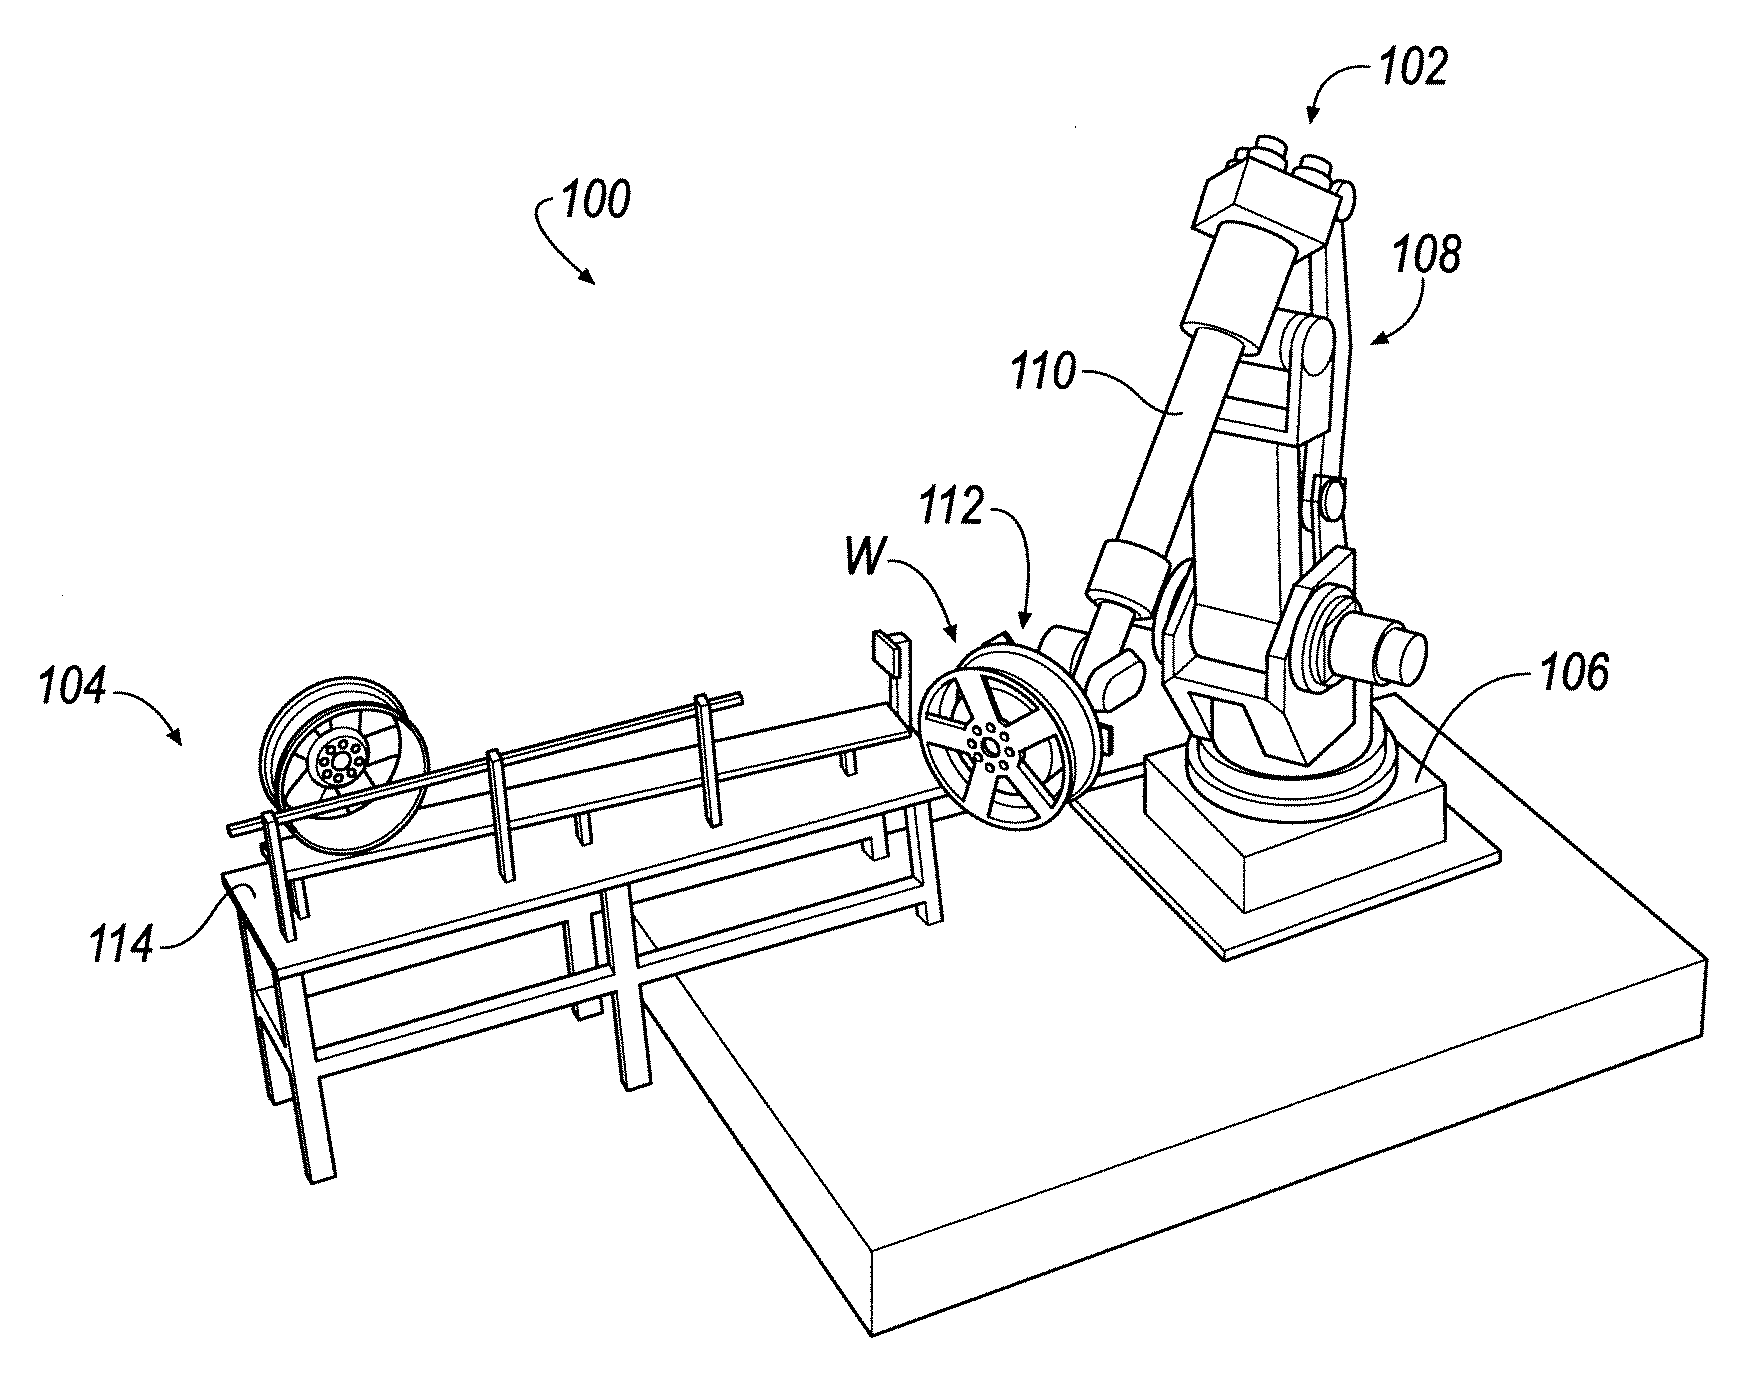 Method and Apparatus for Retaining a Wheel